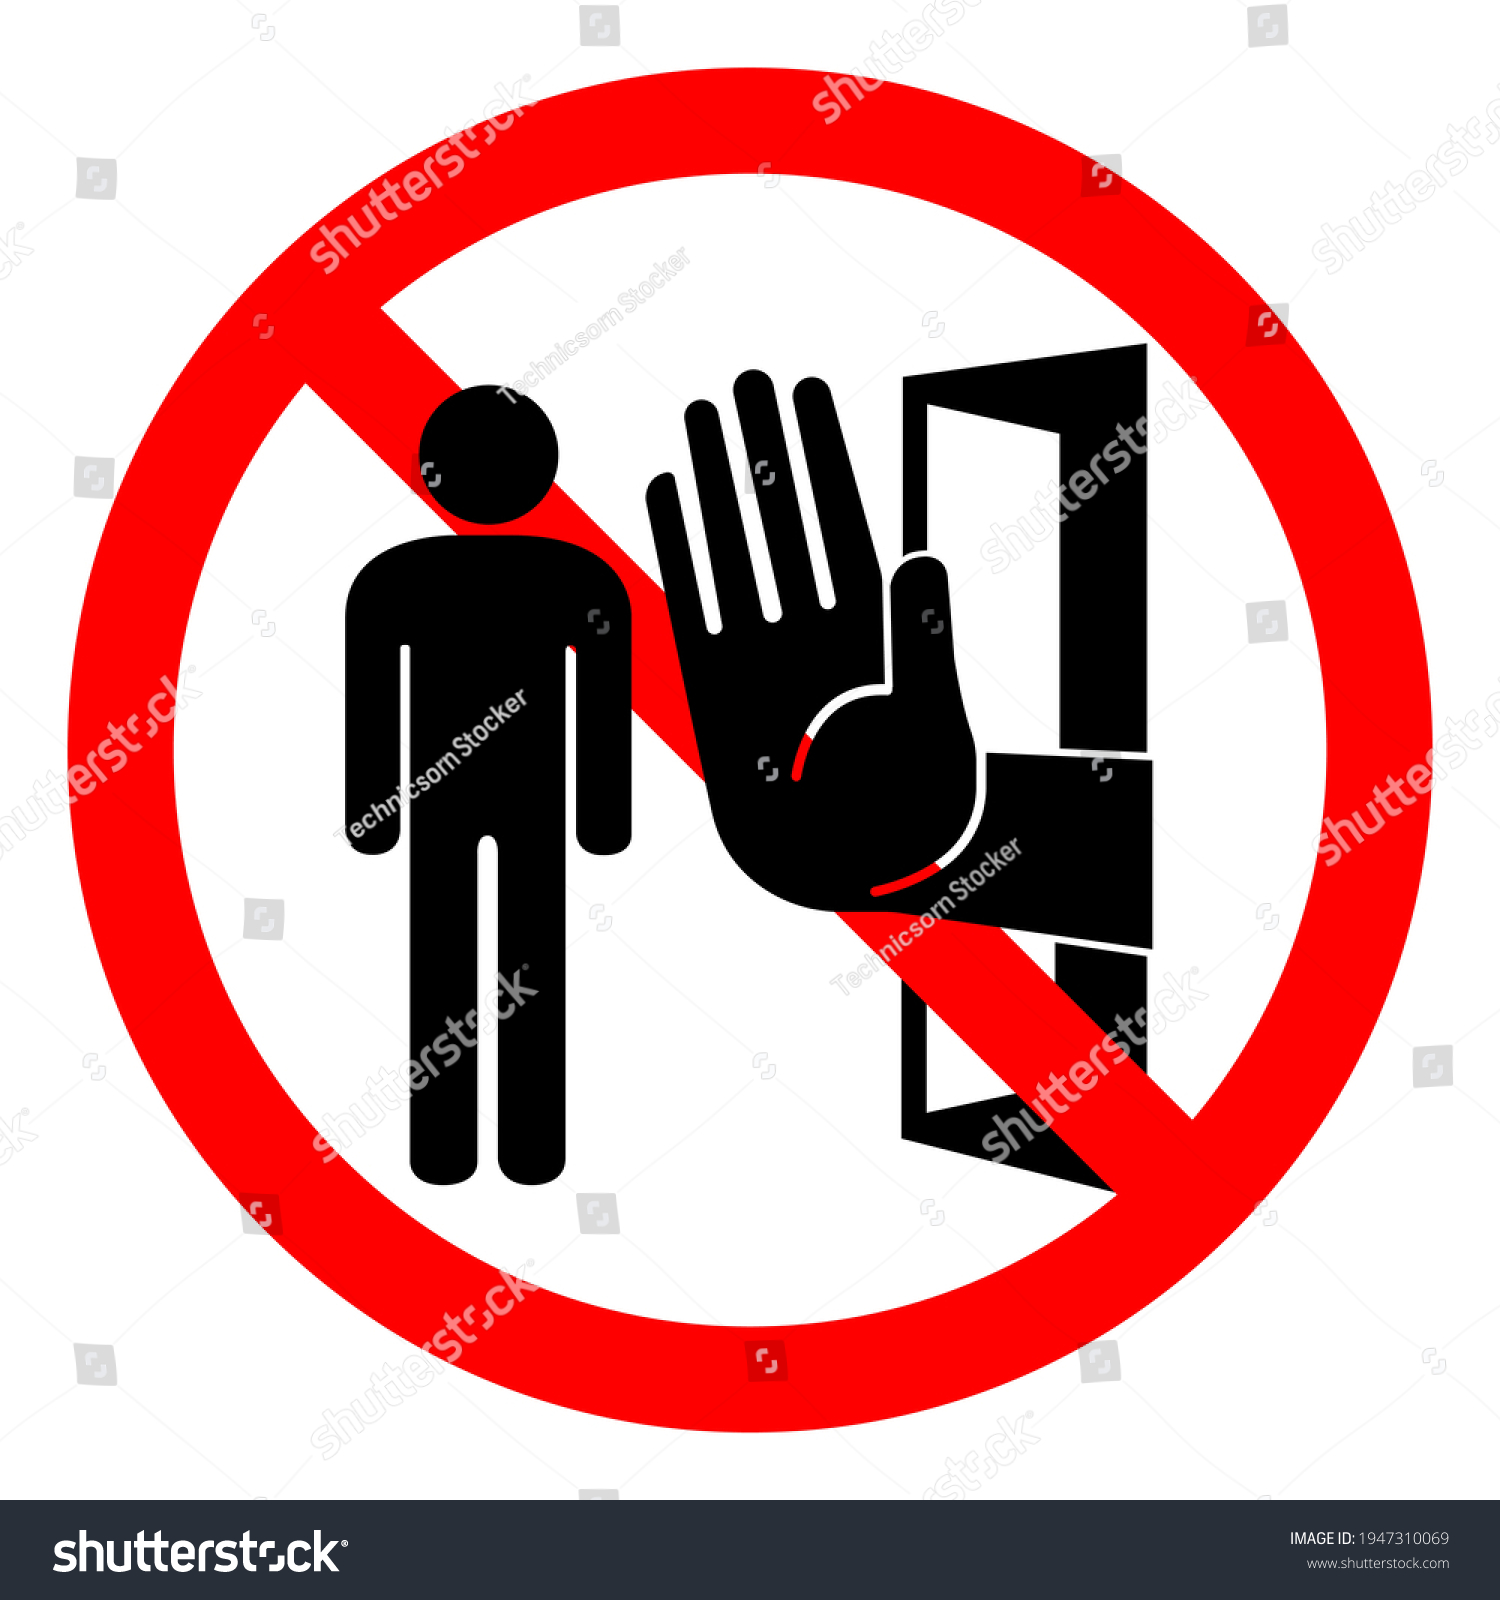 Authorized Personnel Only Symbol Sign Vector Stock Vector Royalty Free